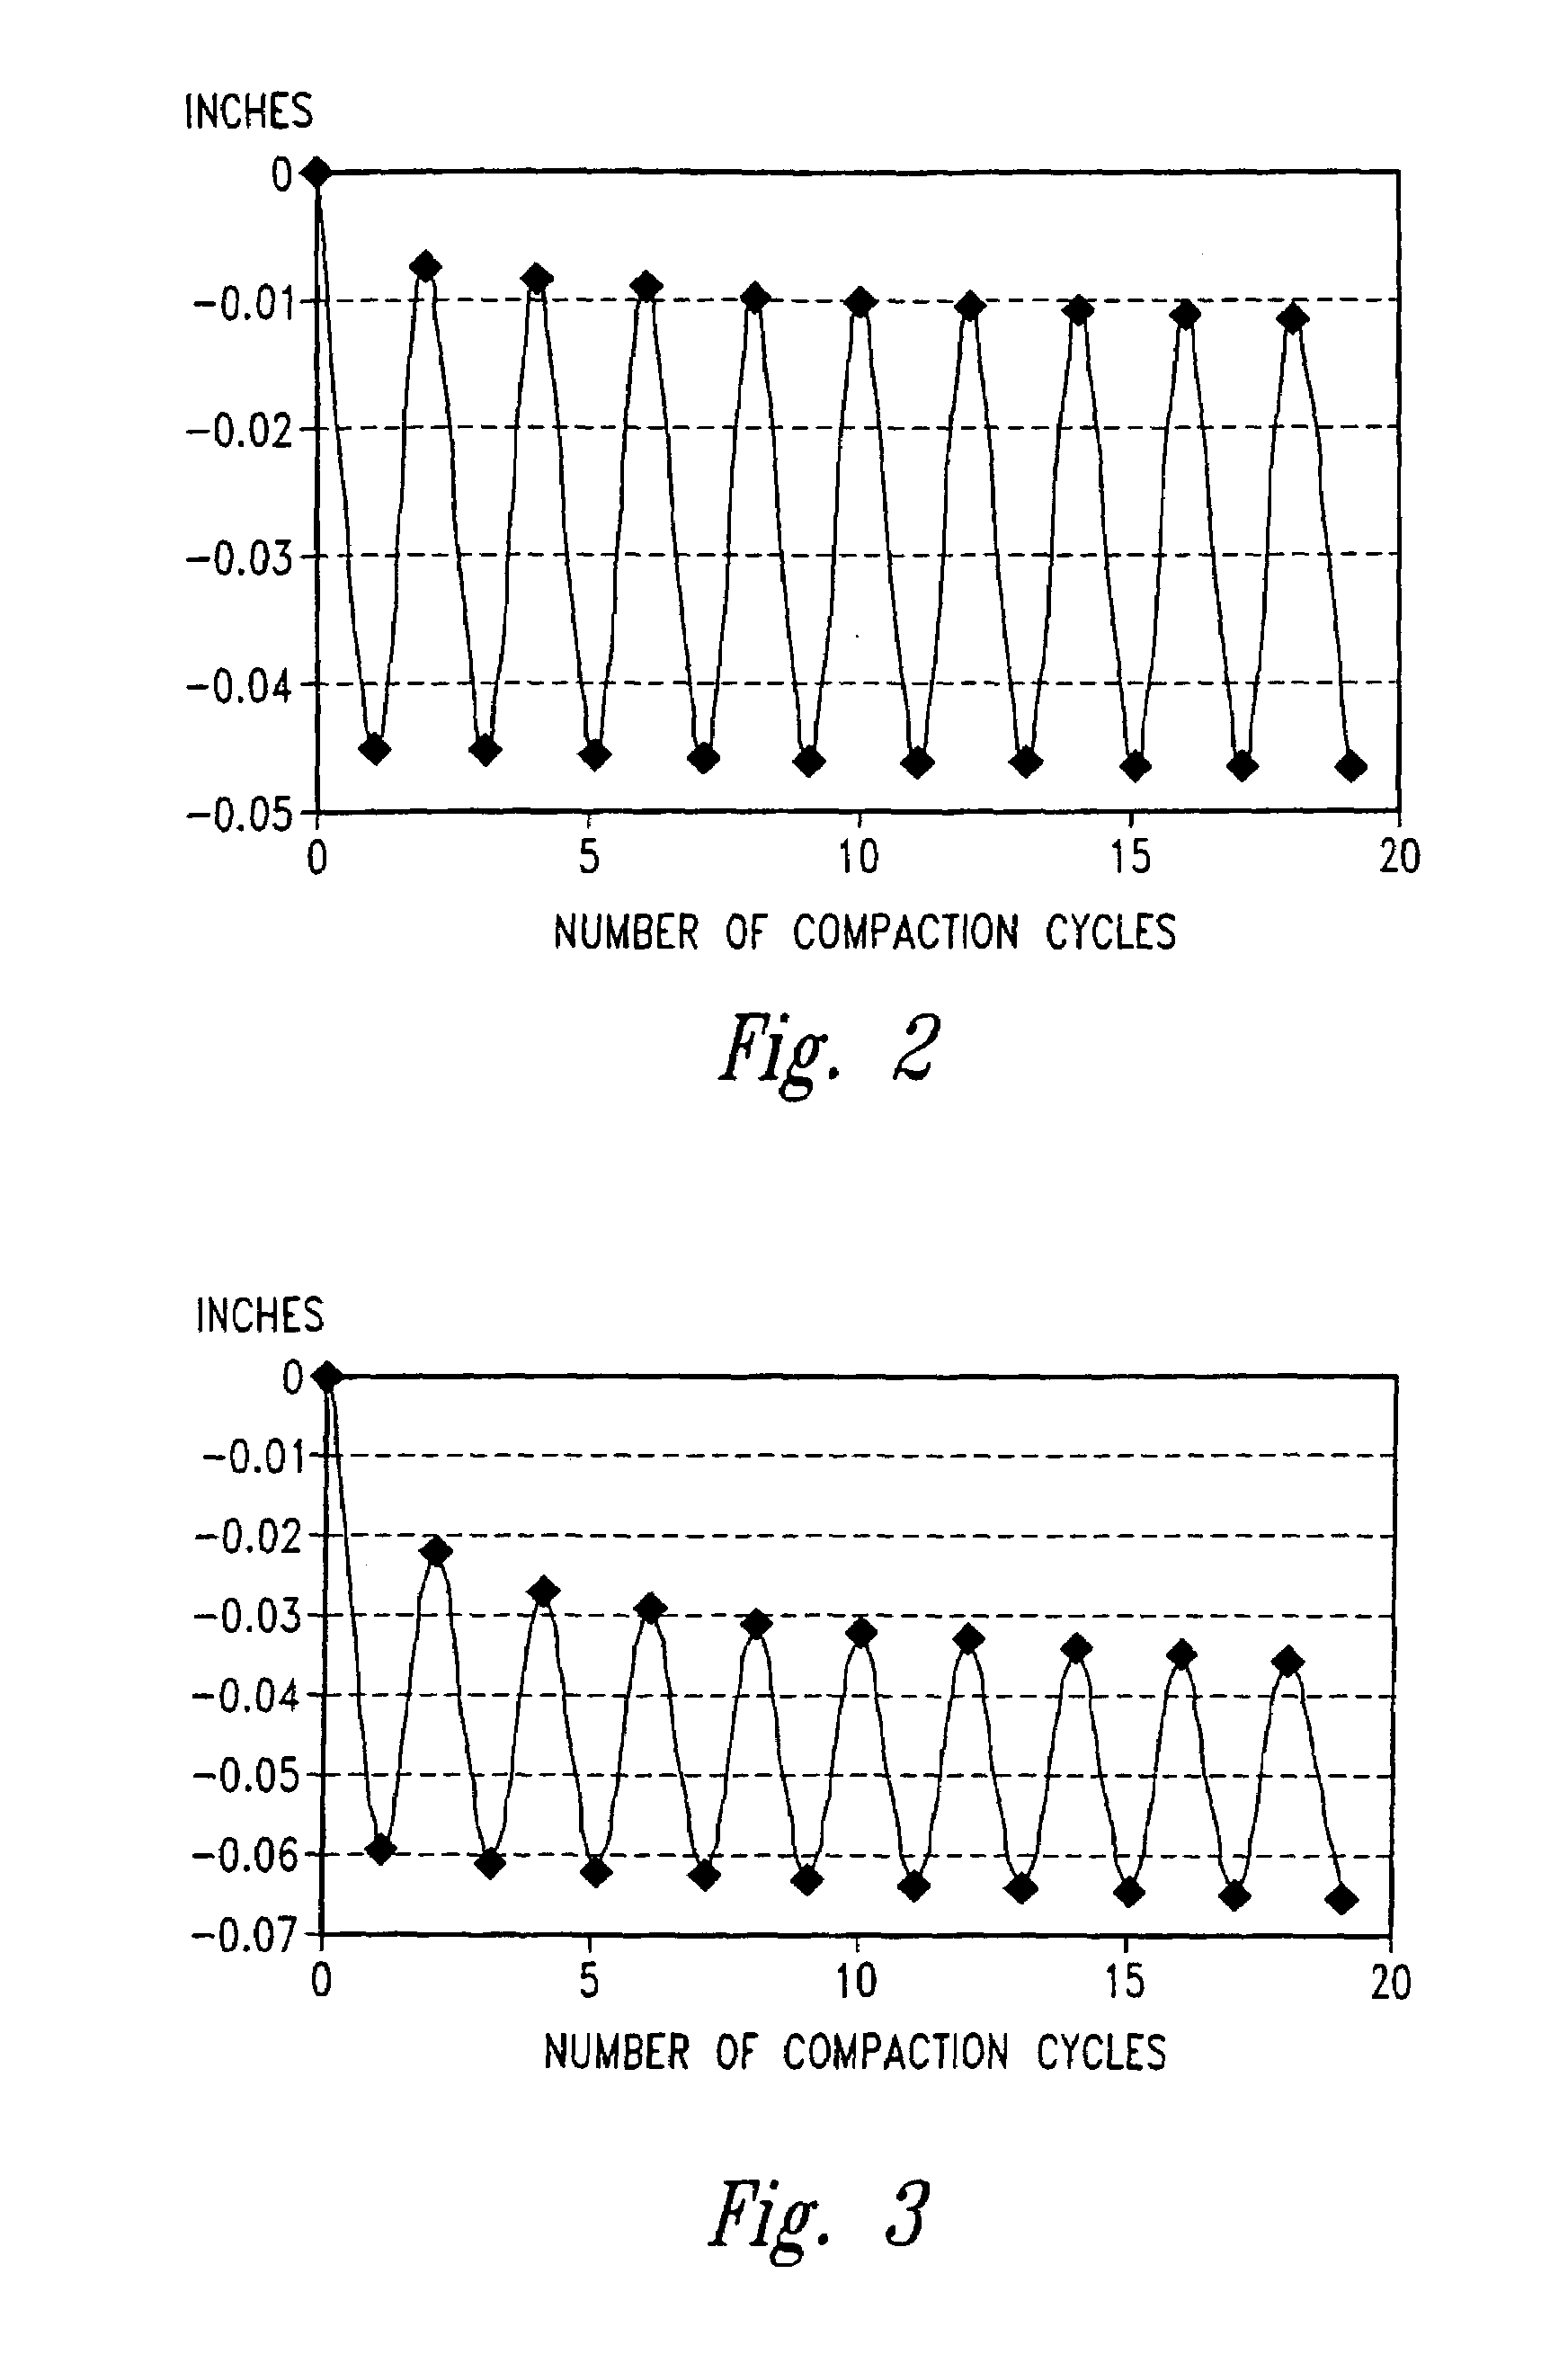 Controlled atmospheric pressure resin infusion process